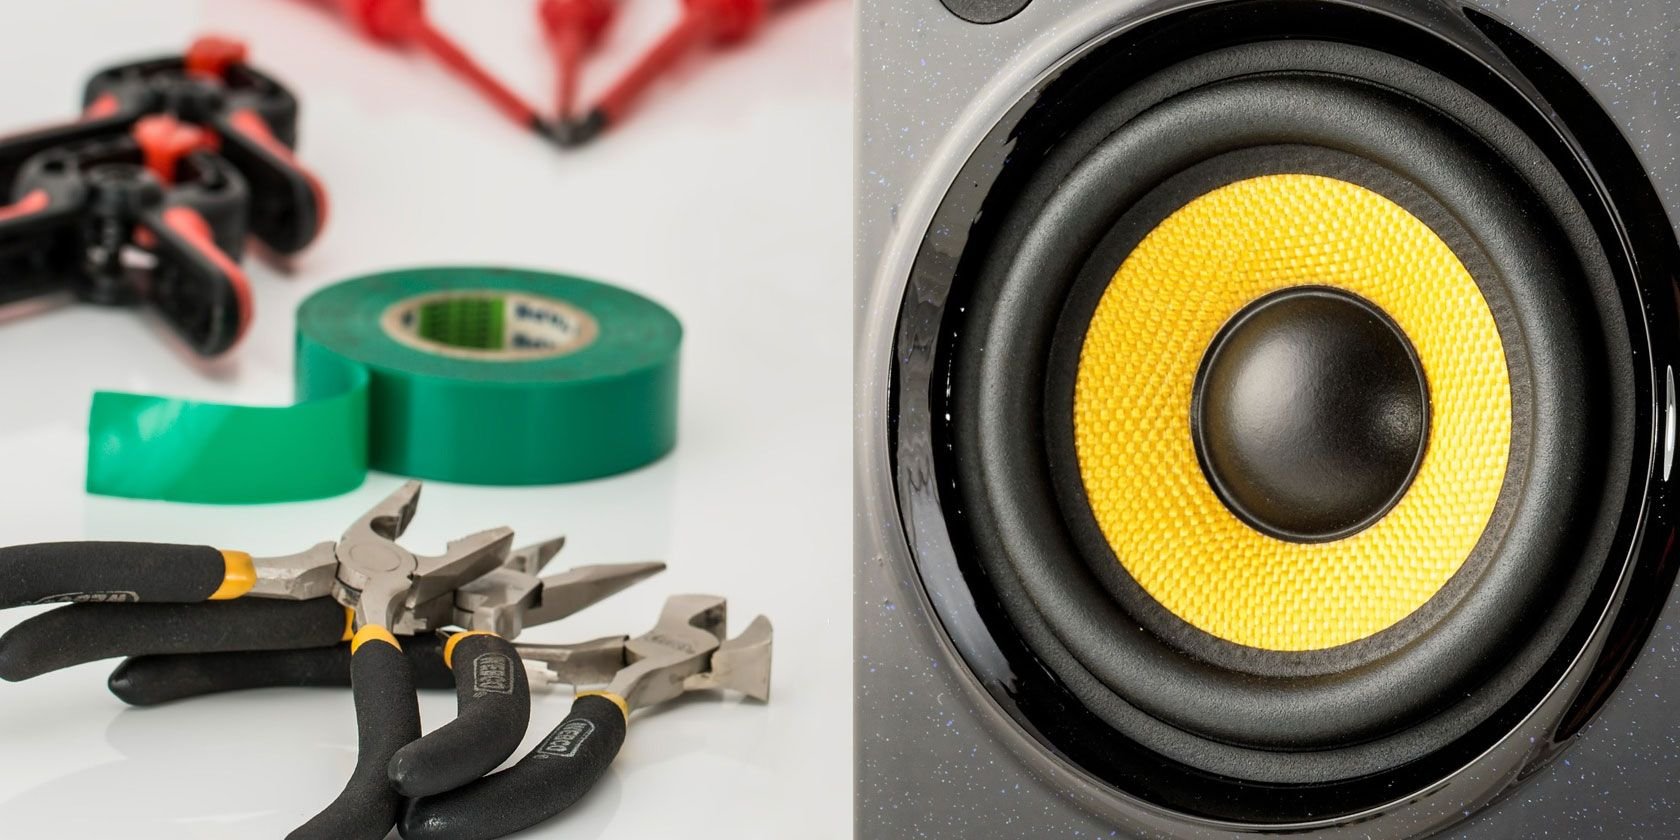 7 Creative DIY Projects to Repurpose or Recycle Old Speakers